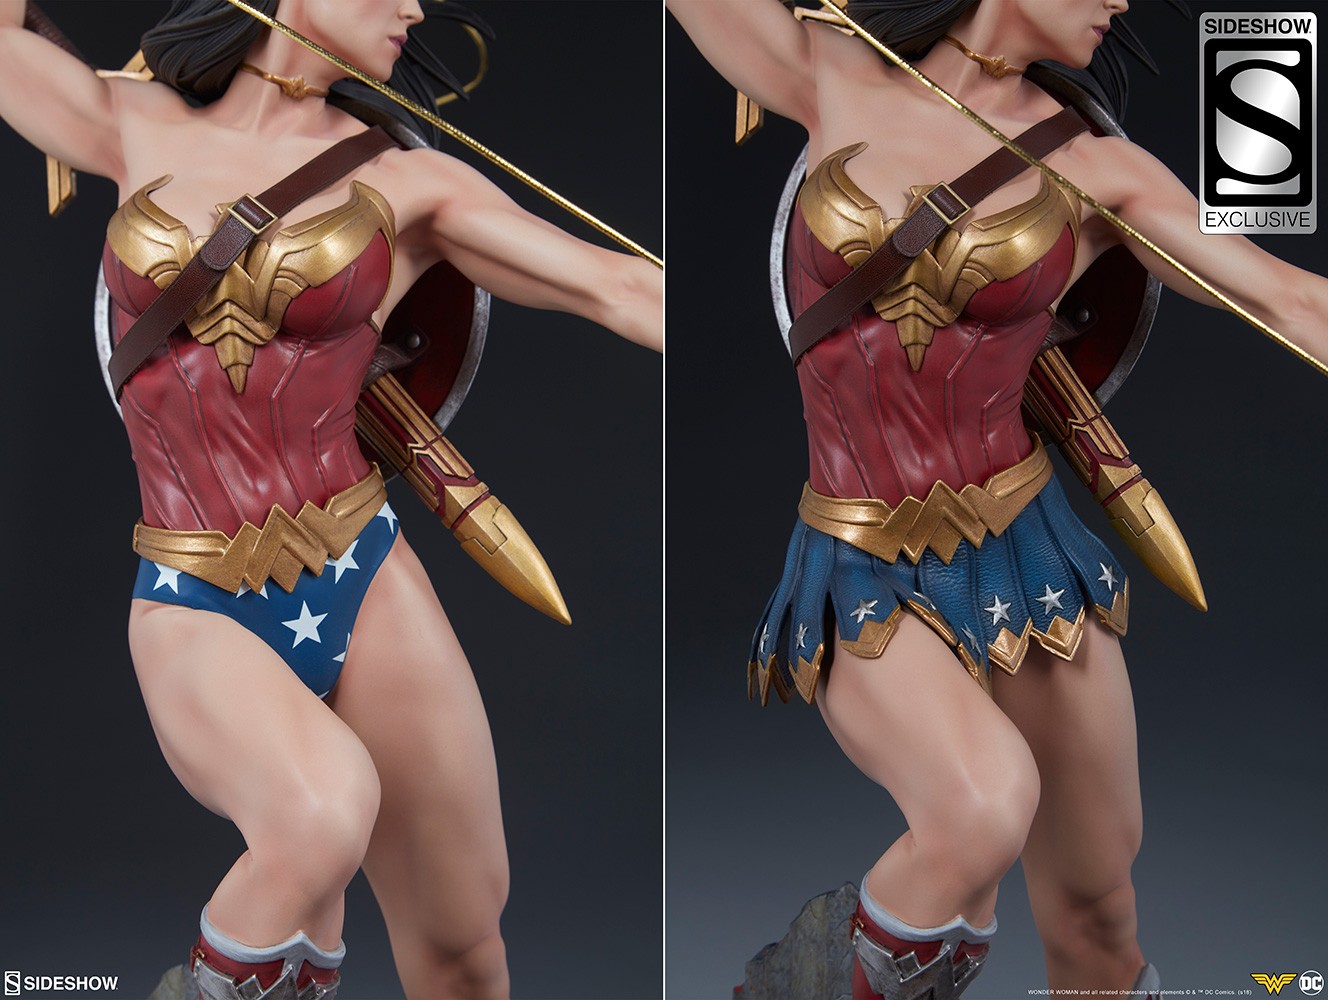 Wonder Woman Exclusive Edition View 4